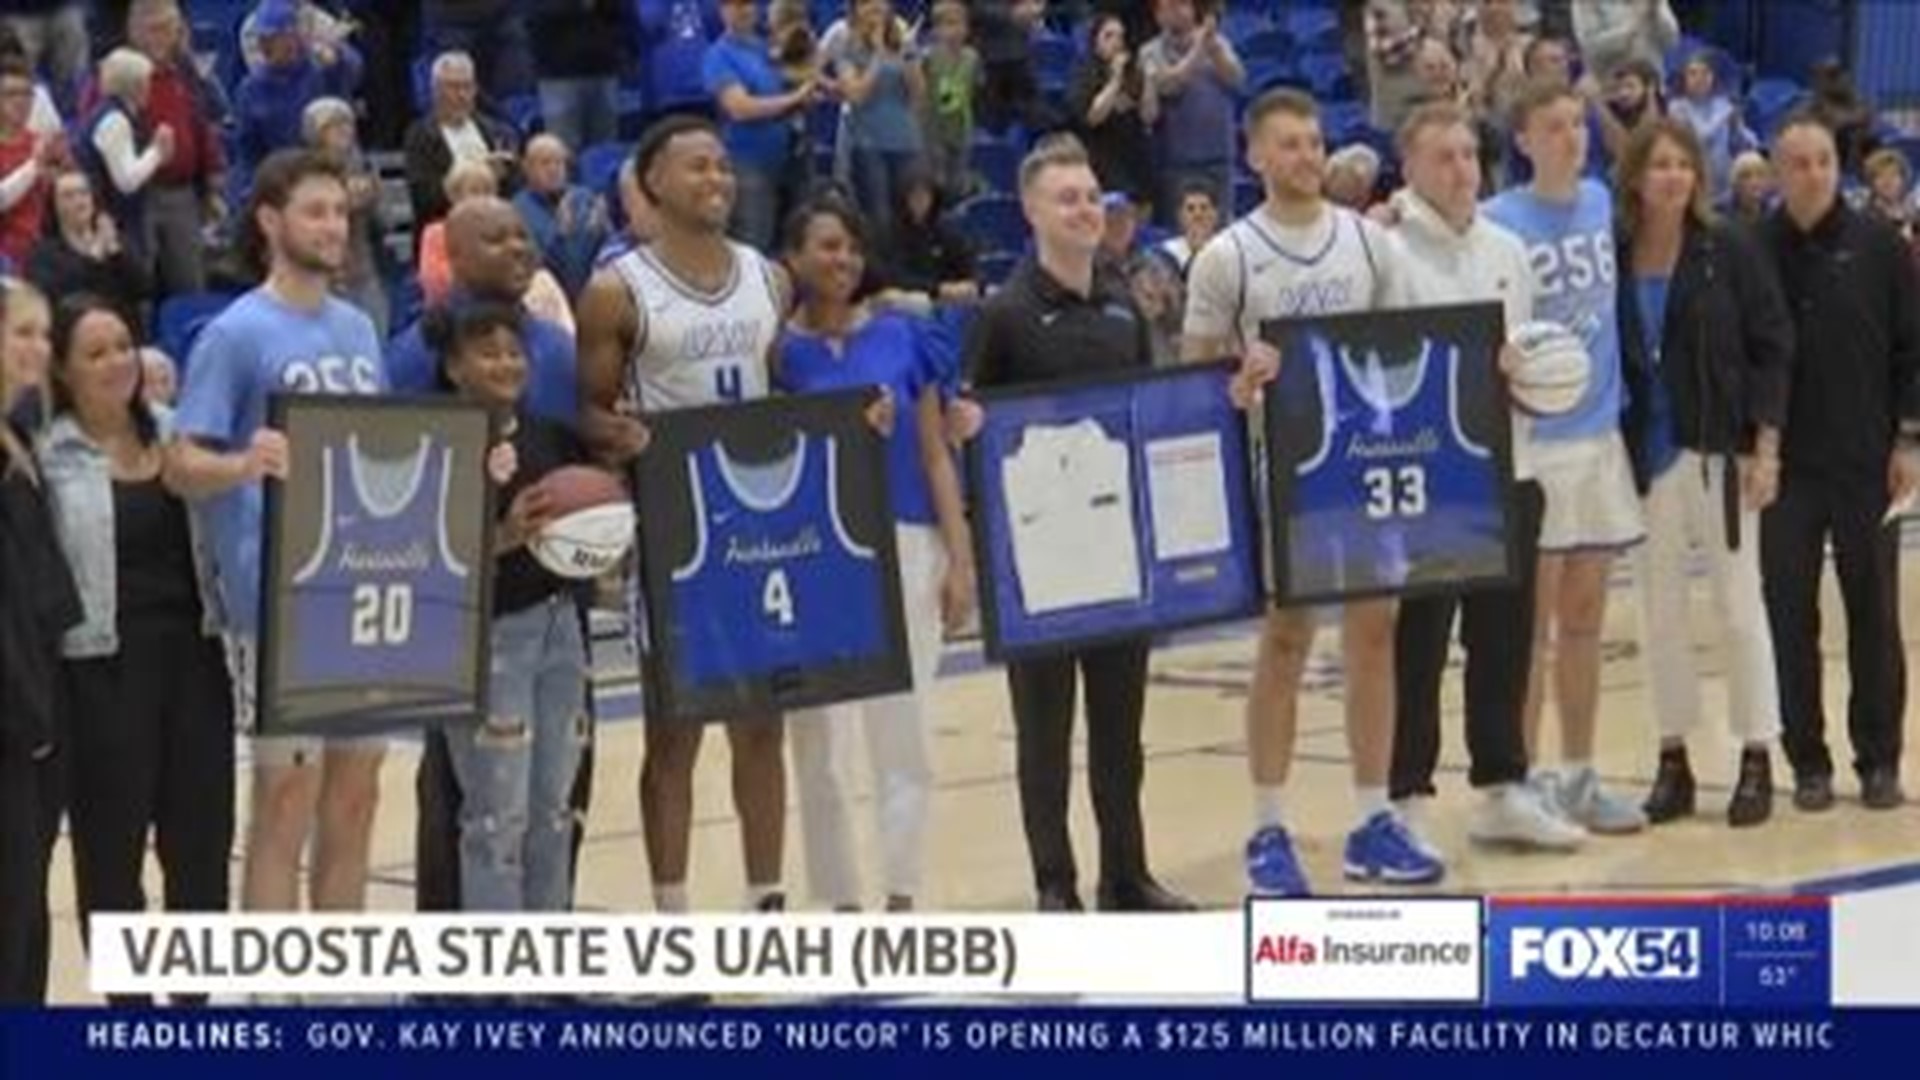 UAH men's and women's basketball faced off against Valdosta State.